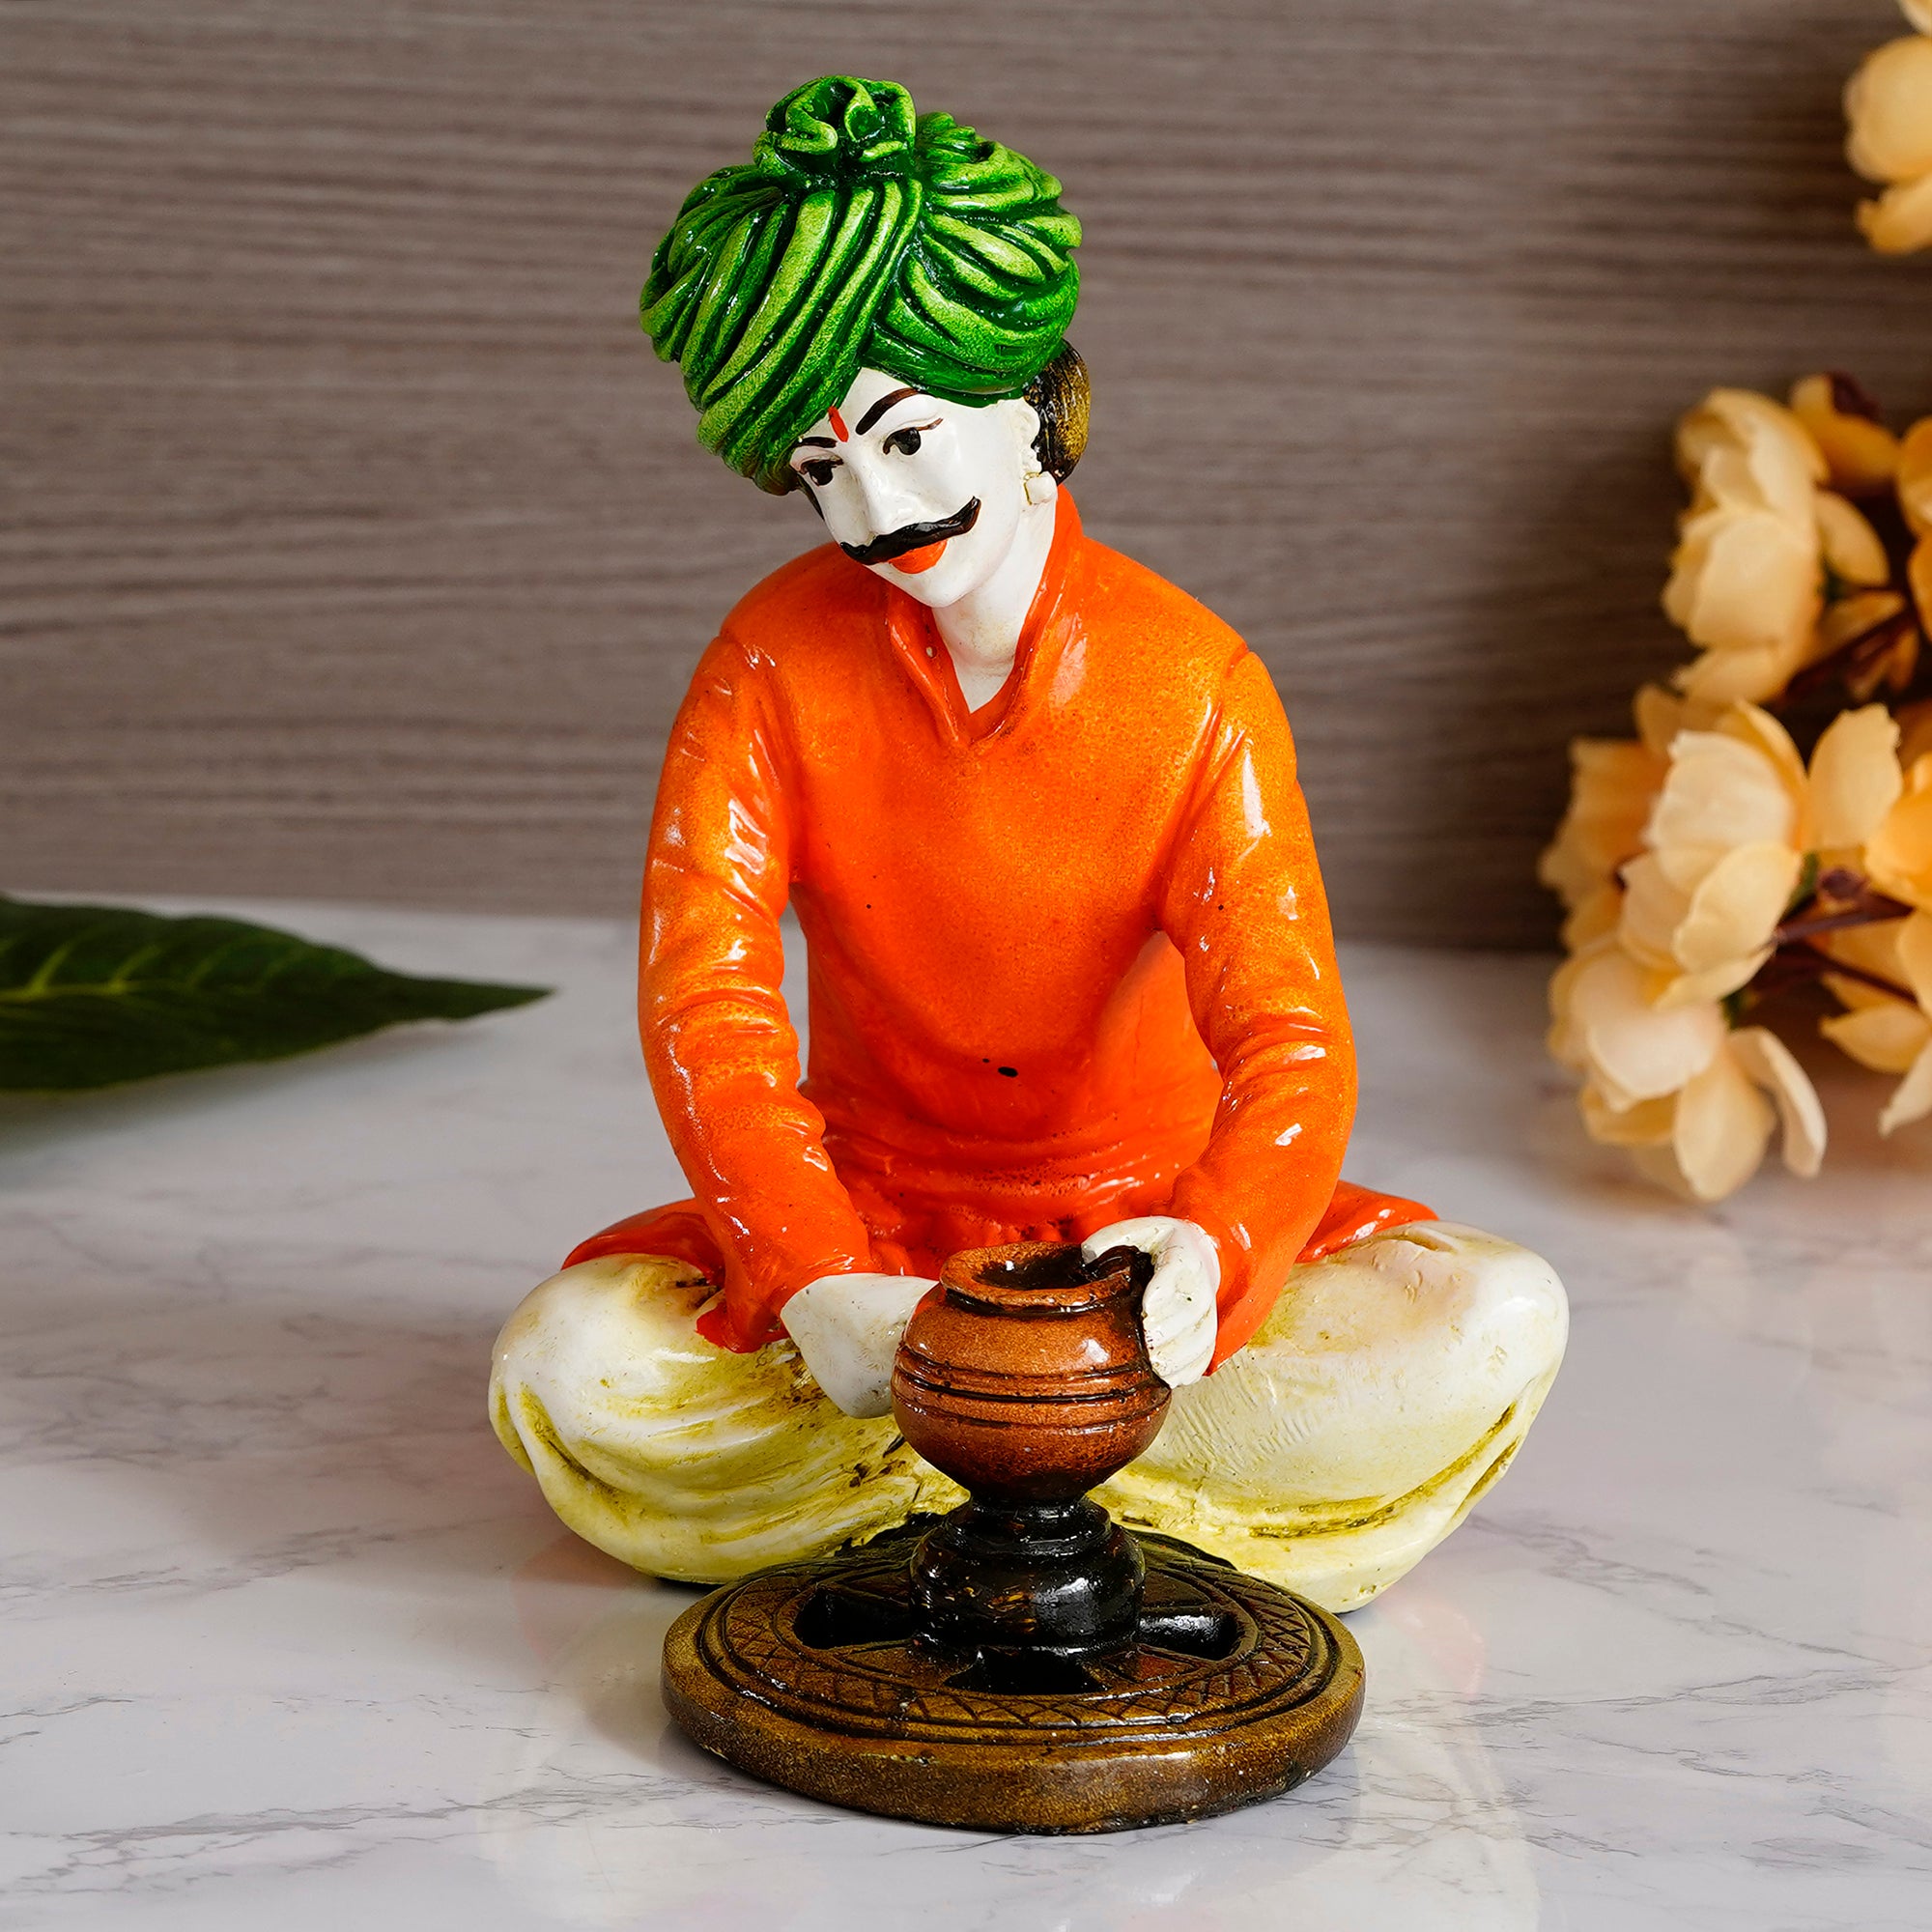 Colorful Rajasthani Man Making Pot Handcrafted Decorative Polyresin Showpiece